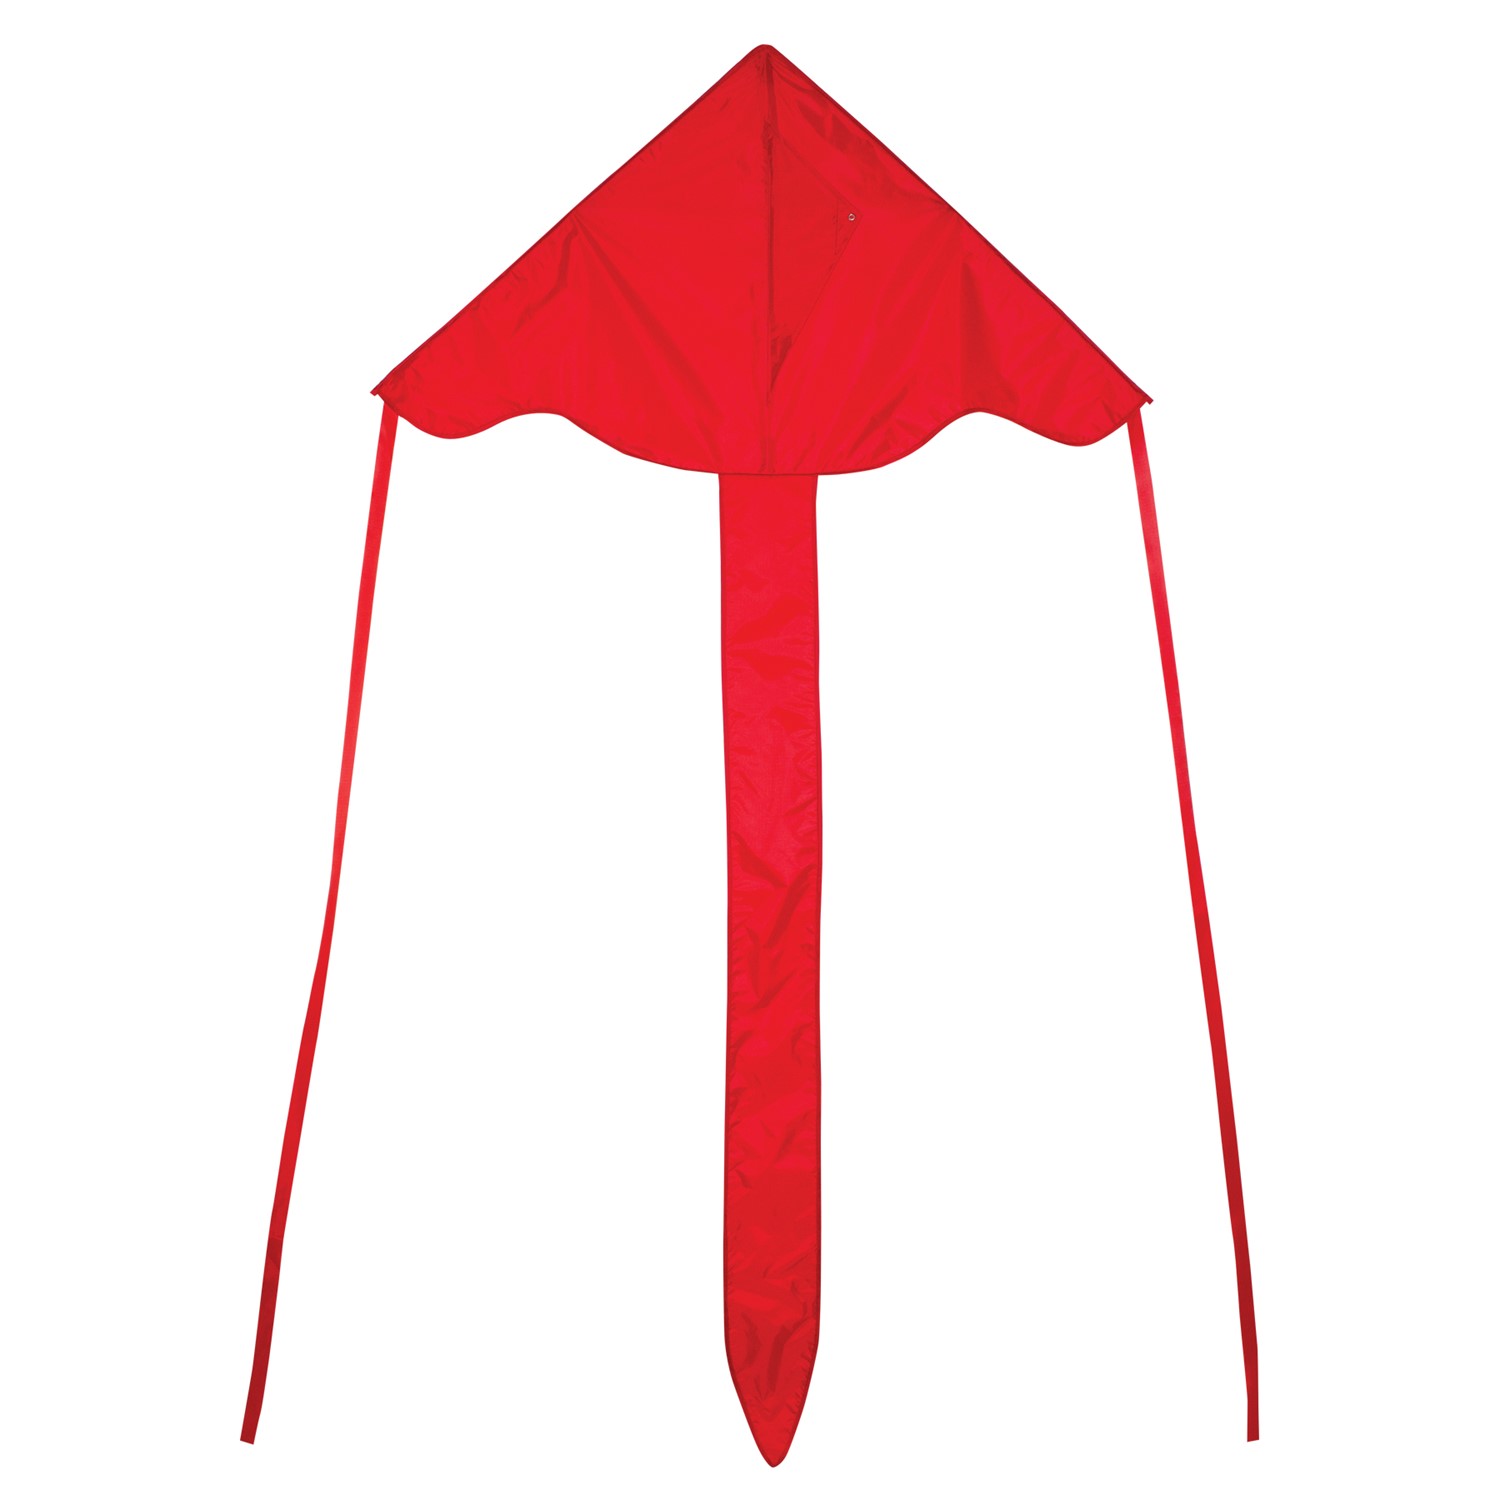 In the Breeze Red Colorfly 43" Fly-Hi Kite 3208